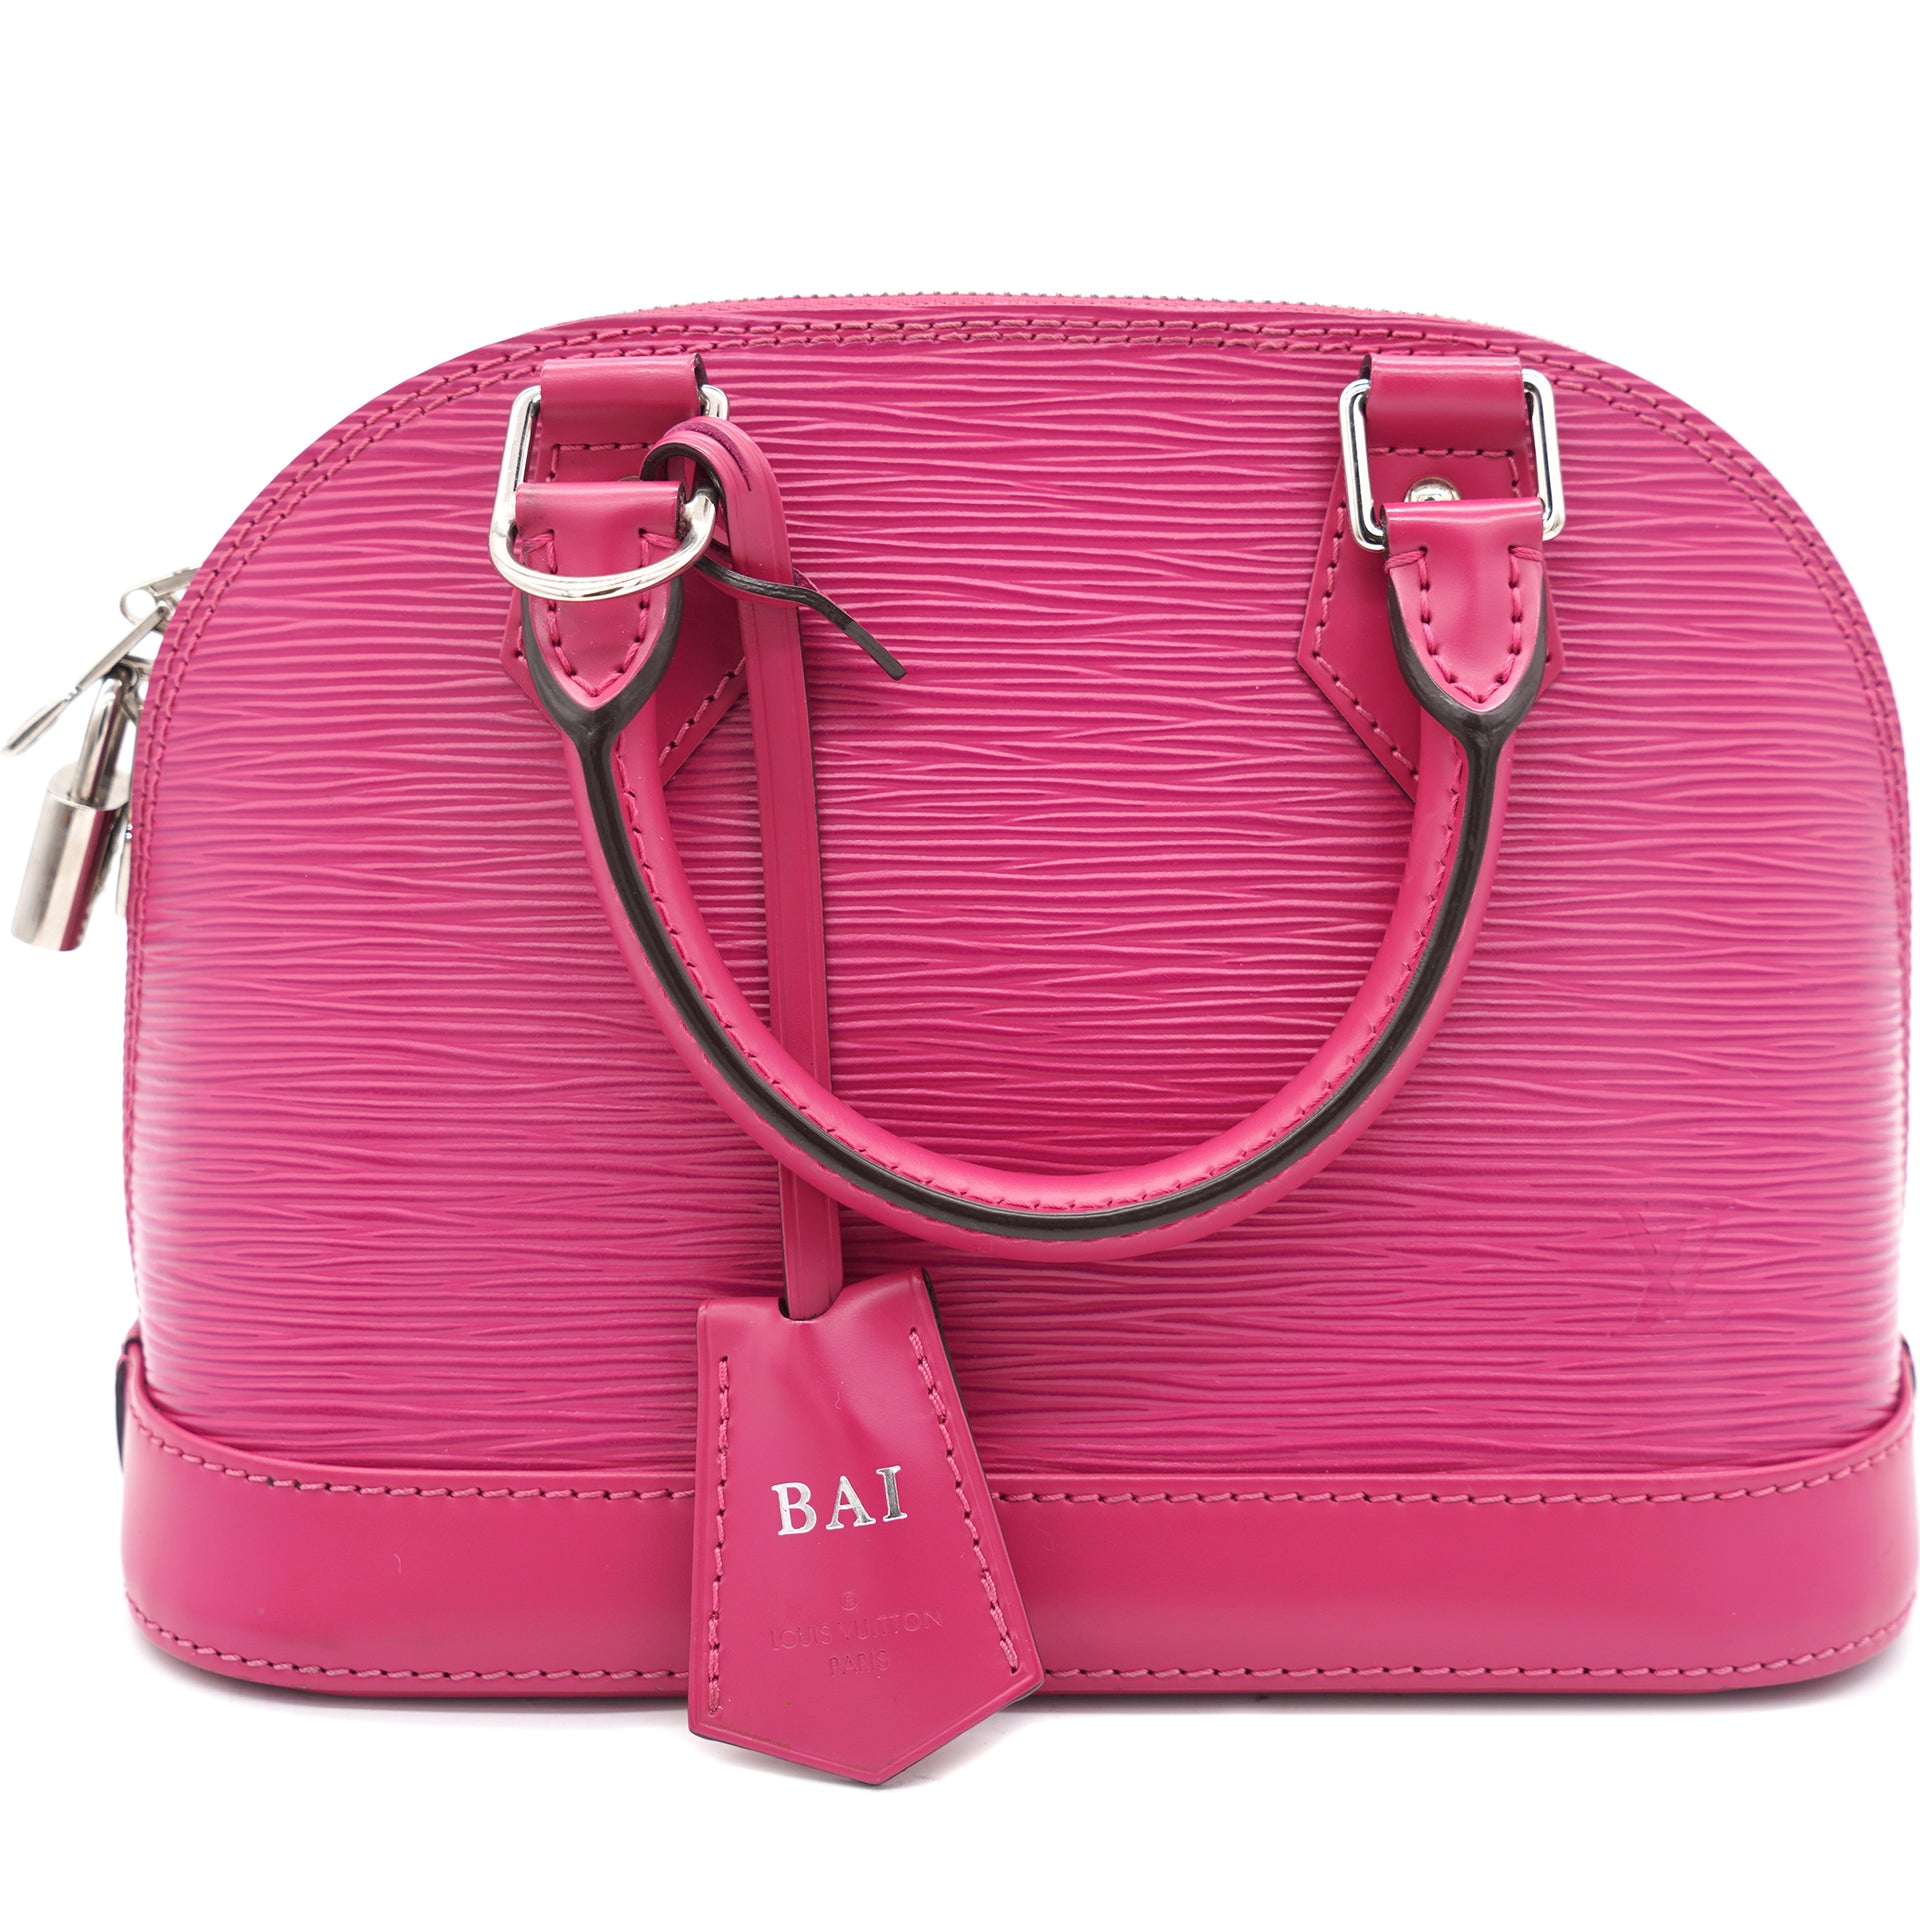 Alma leather handbag Louis Vuitton Pink in Leather - 38937962